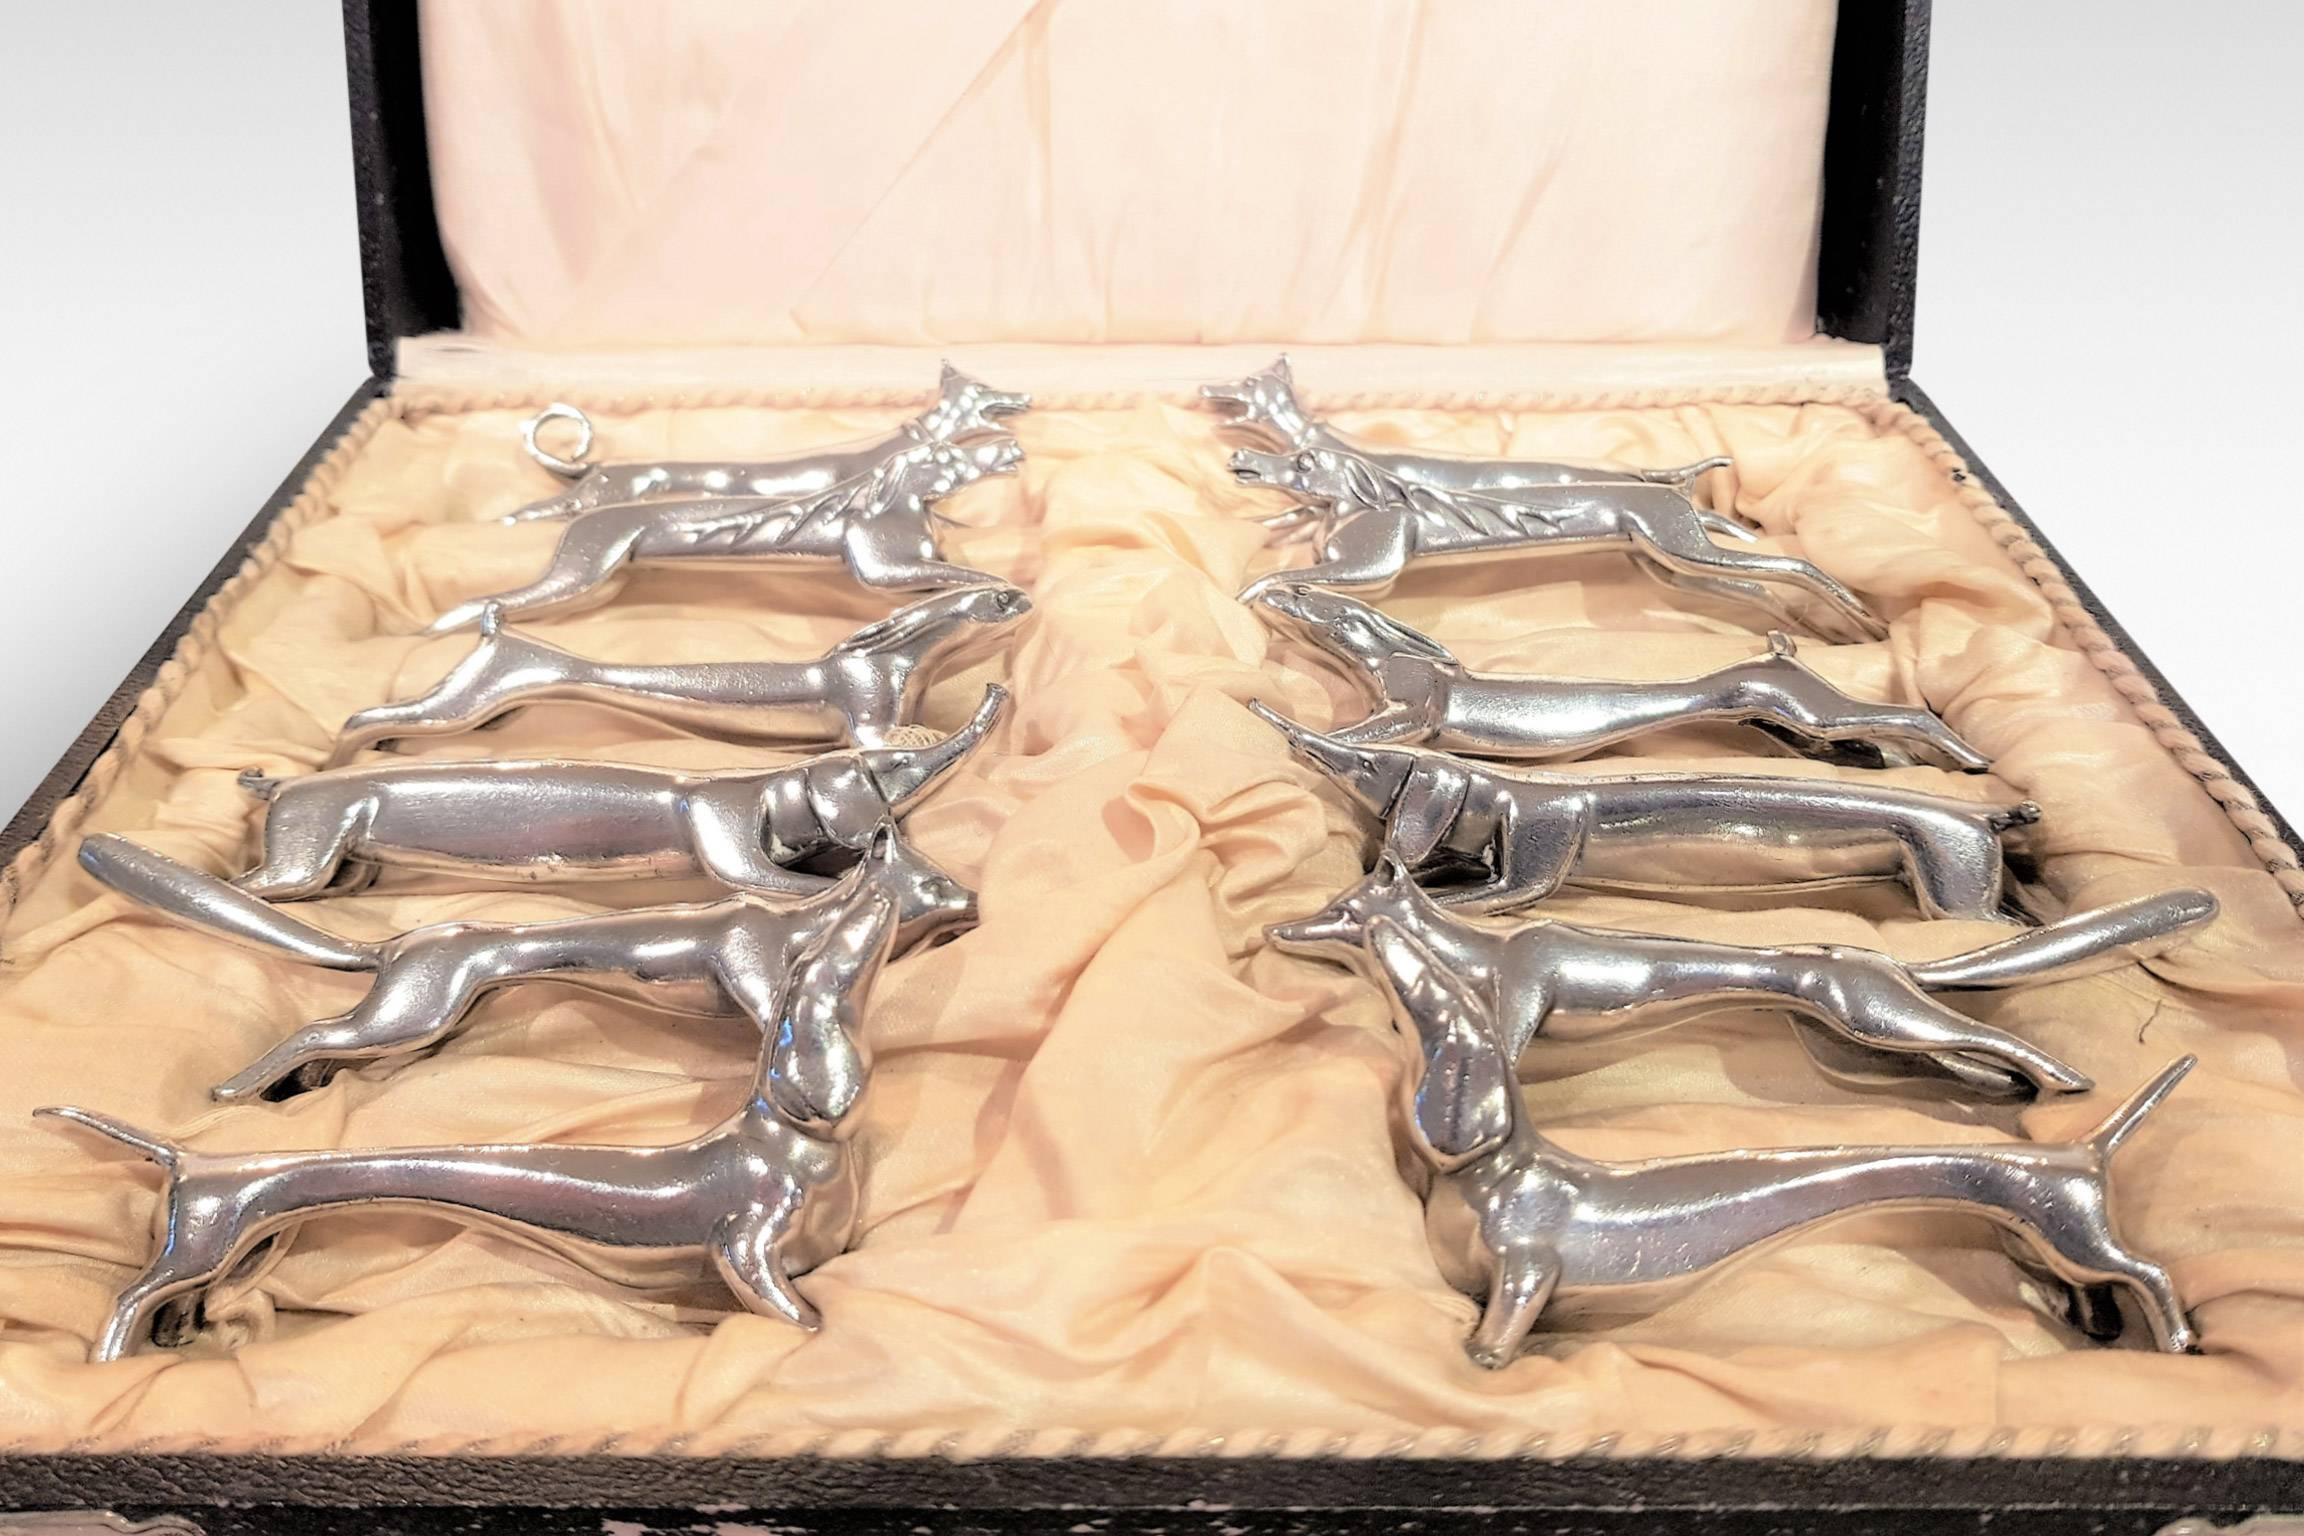 This a rare complete set in its original box of 12 hunting related knife rests featuring pairs of dogs, hounds, foxes, hares, stags and elephants,
circa 1909-1914, and retailed by Orfevrerie Miele & Co, Paris (see illustrations).
Each piece marked